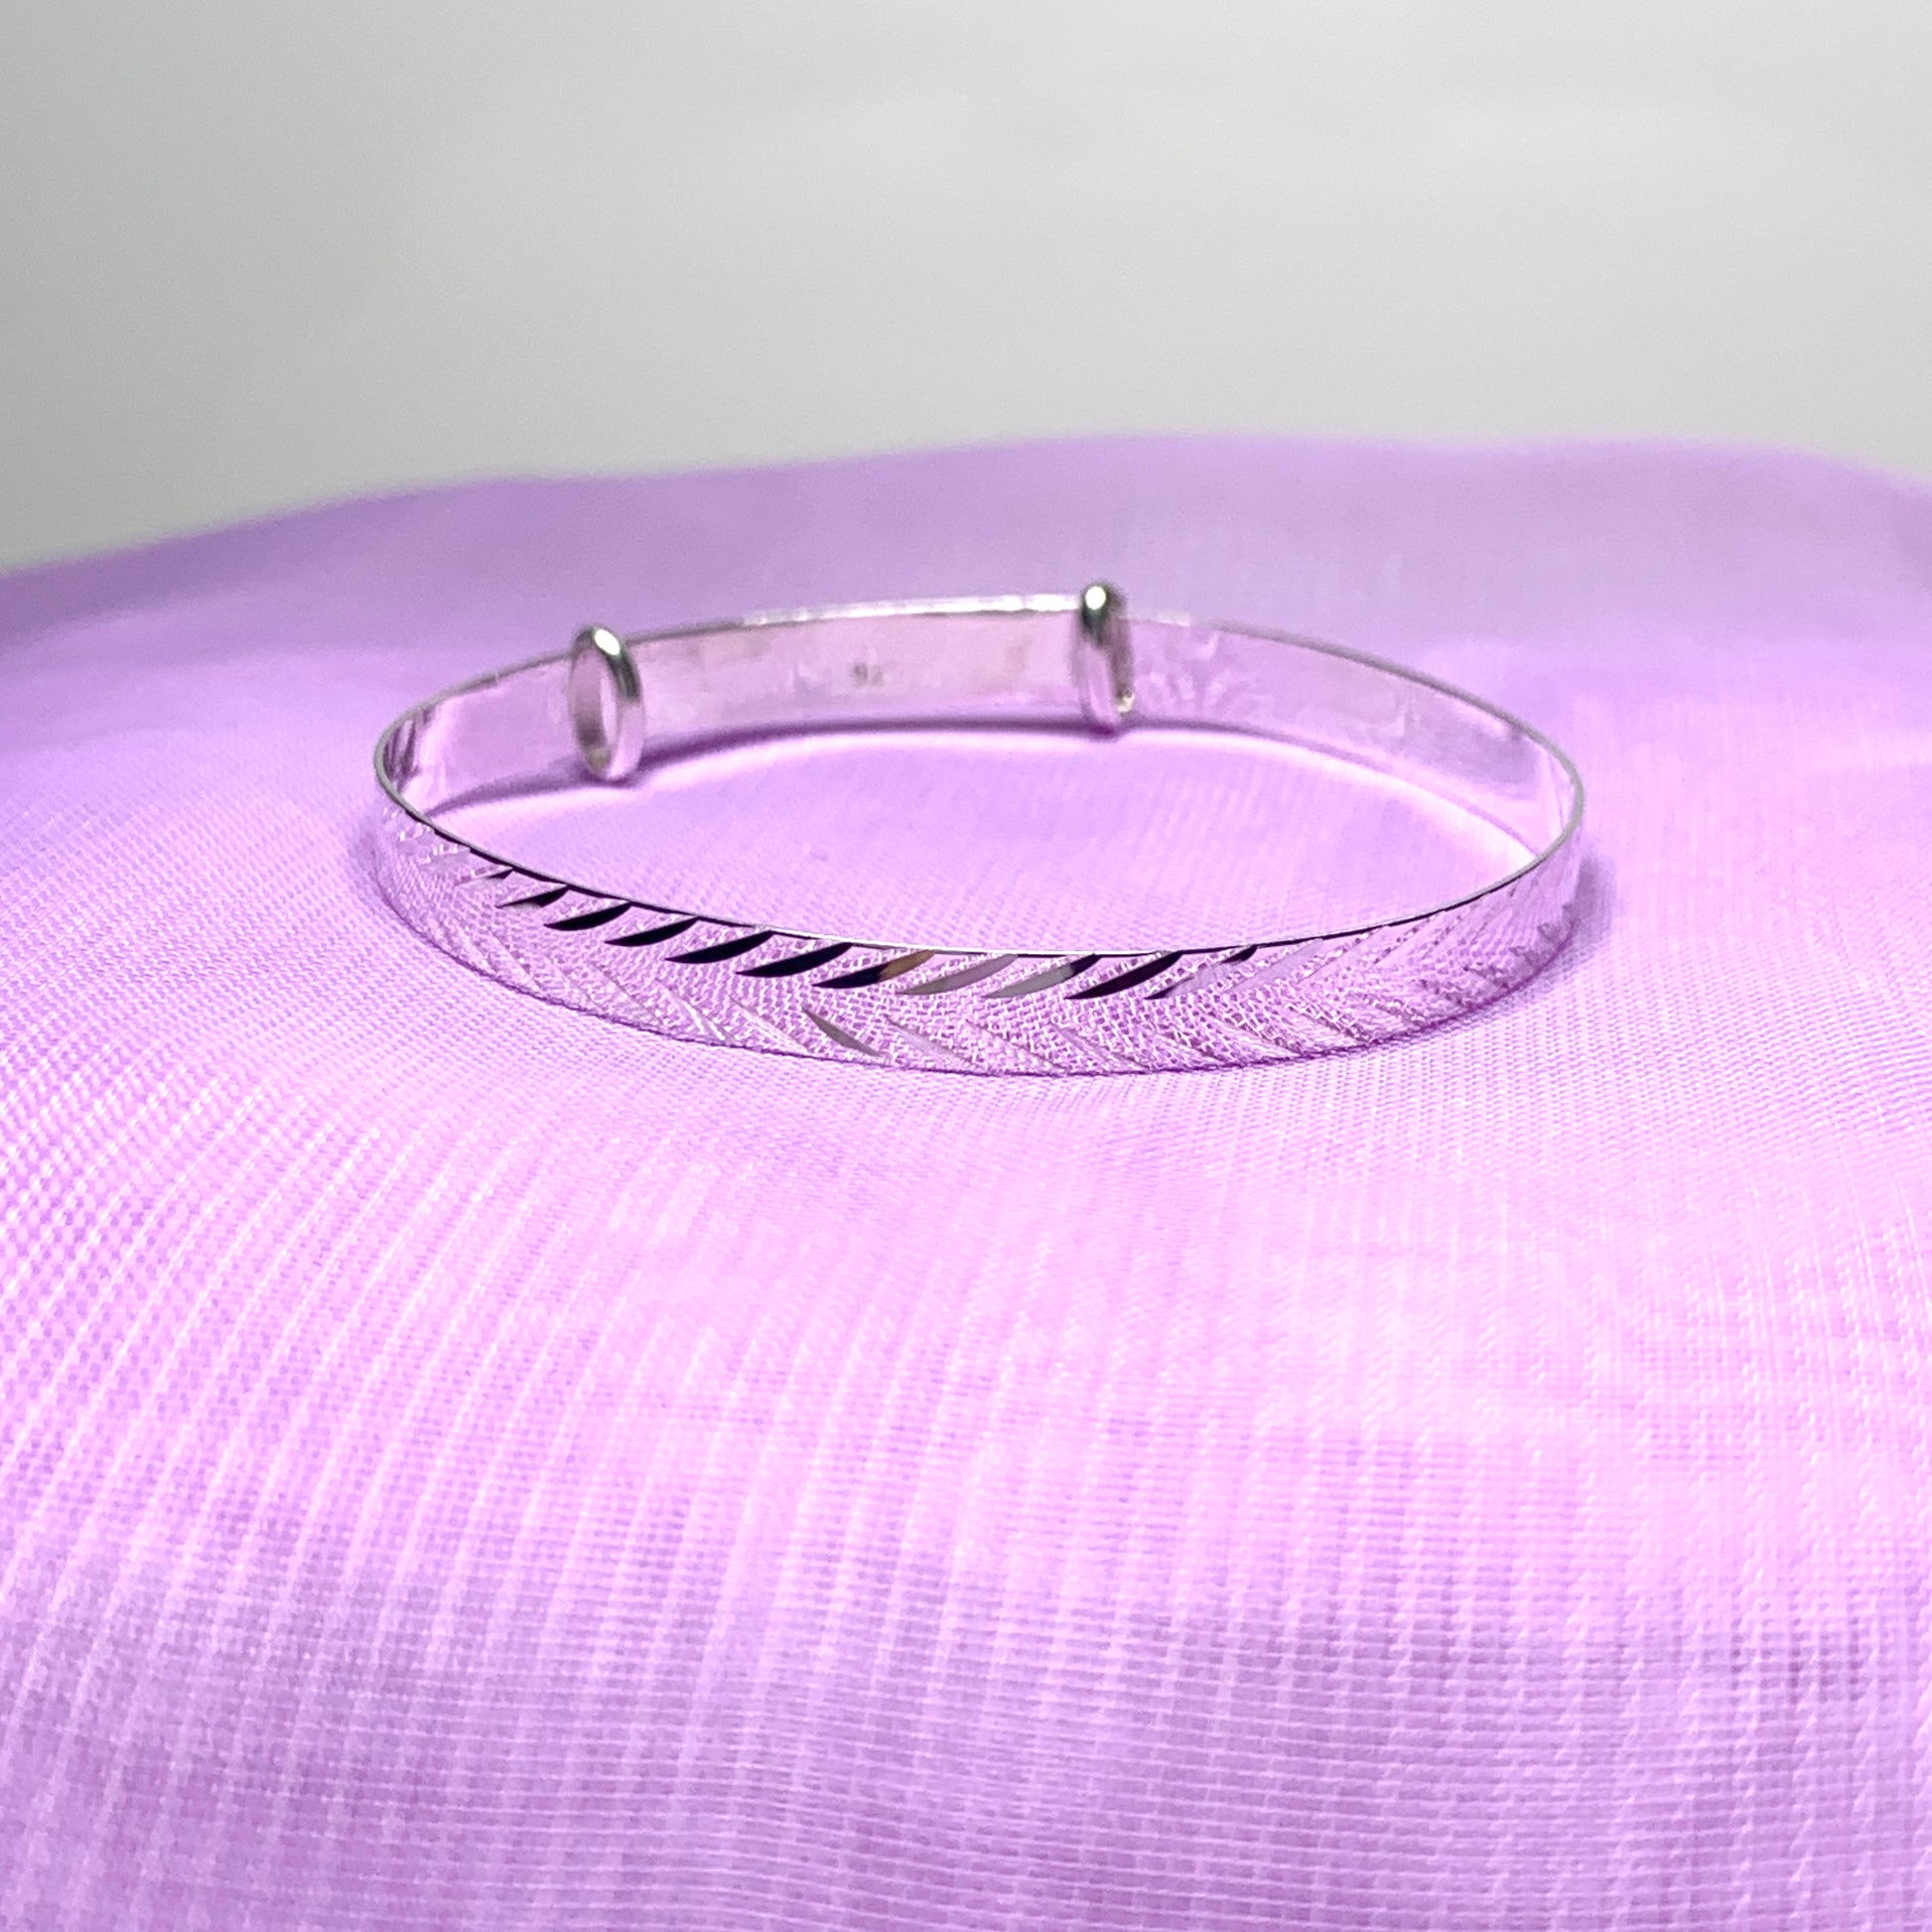 Child’s expanding bangle with a diamond cut design sterling silver